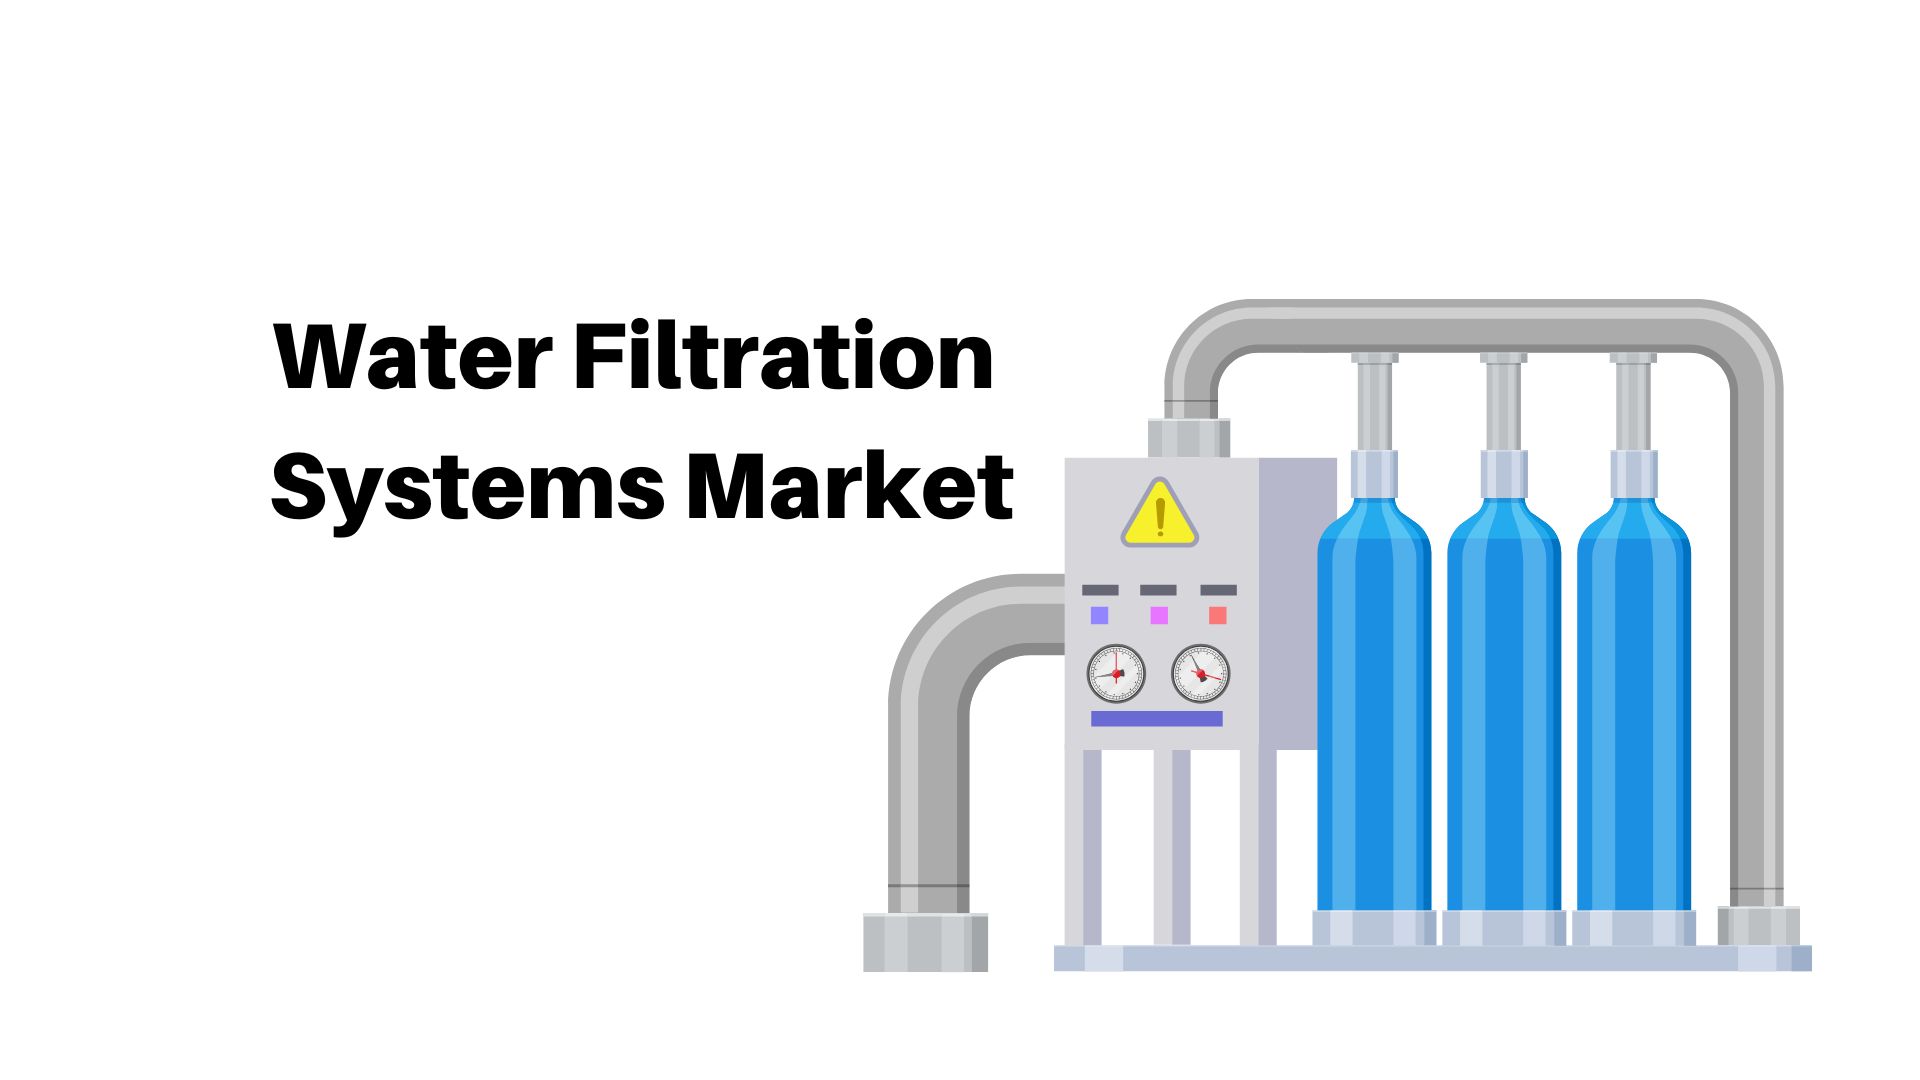 Water Filtration Systems Market is expected to reach its peak value of USD 60.7 Billion by 2032